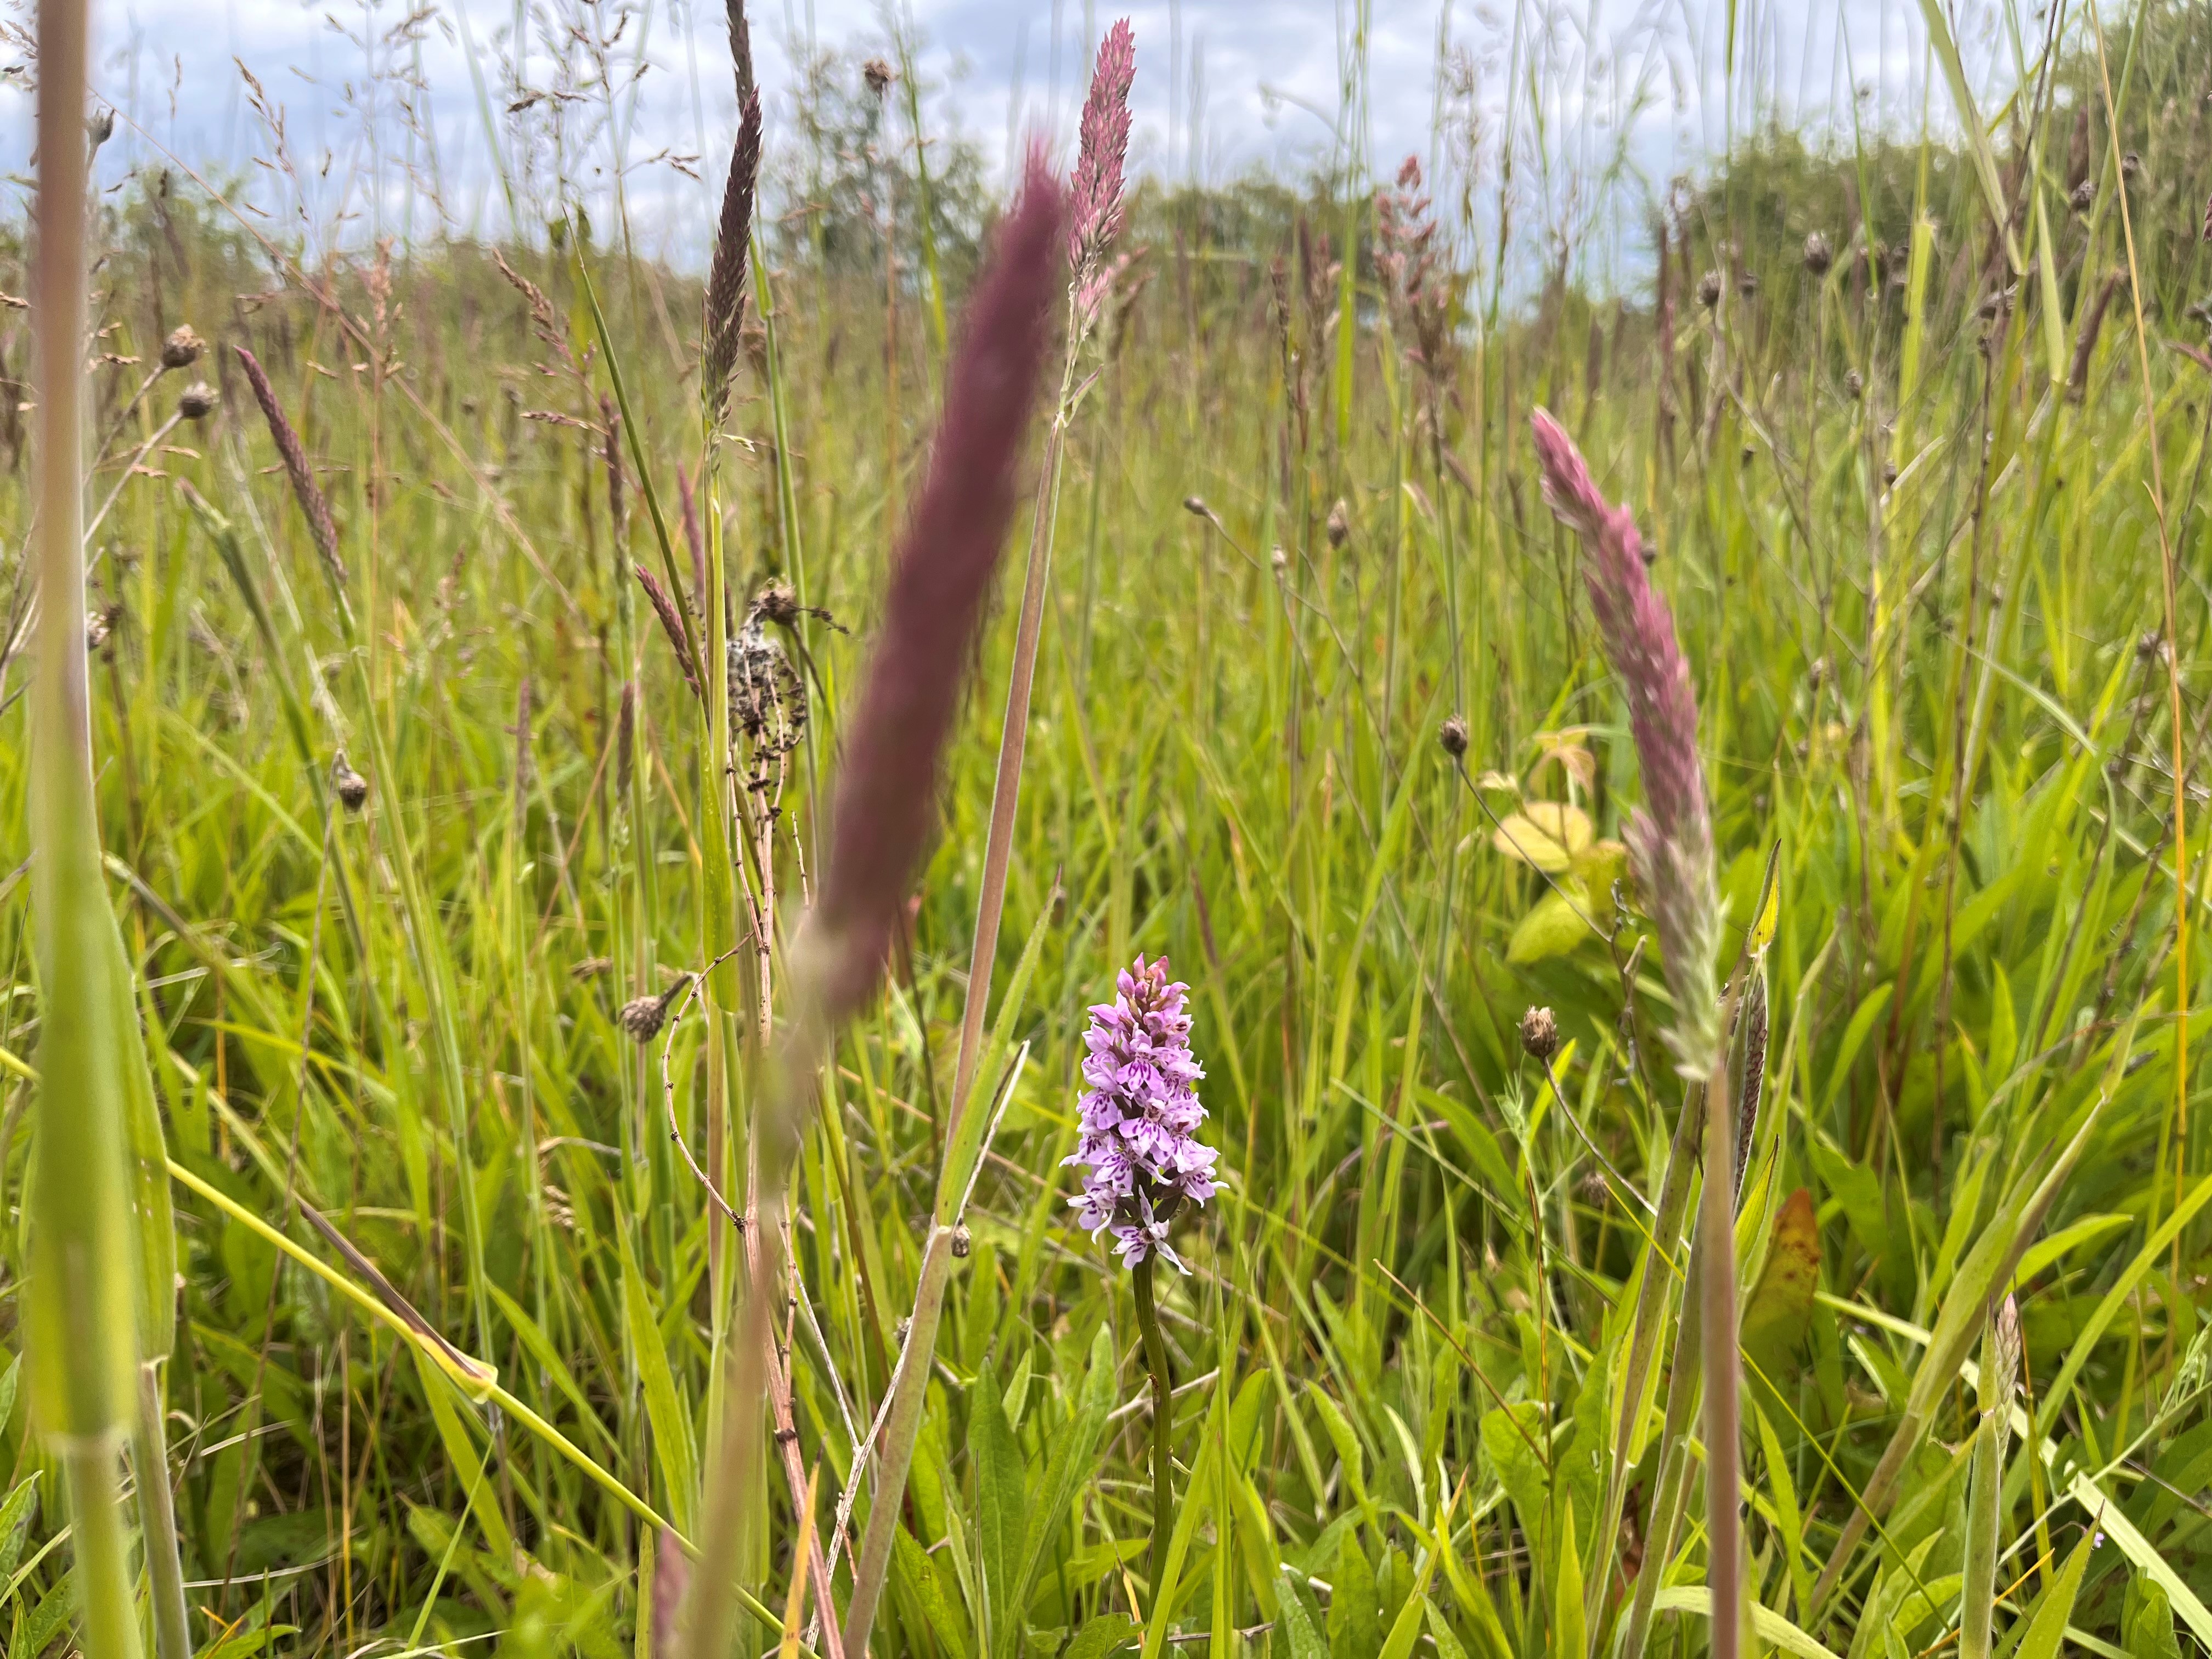 An orchid flowering among grasses